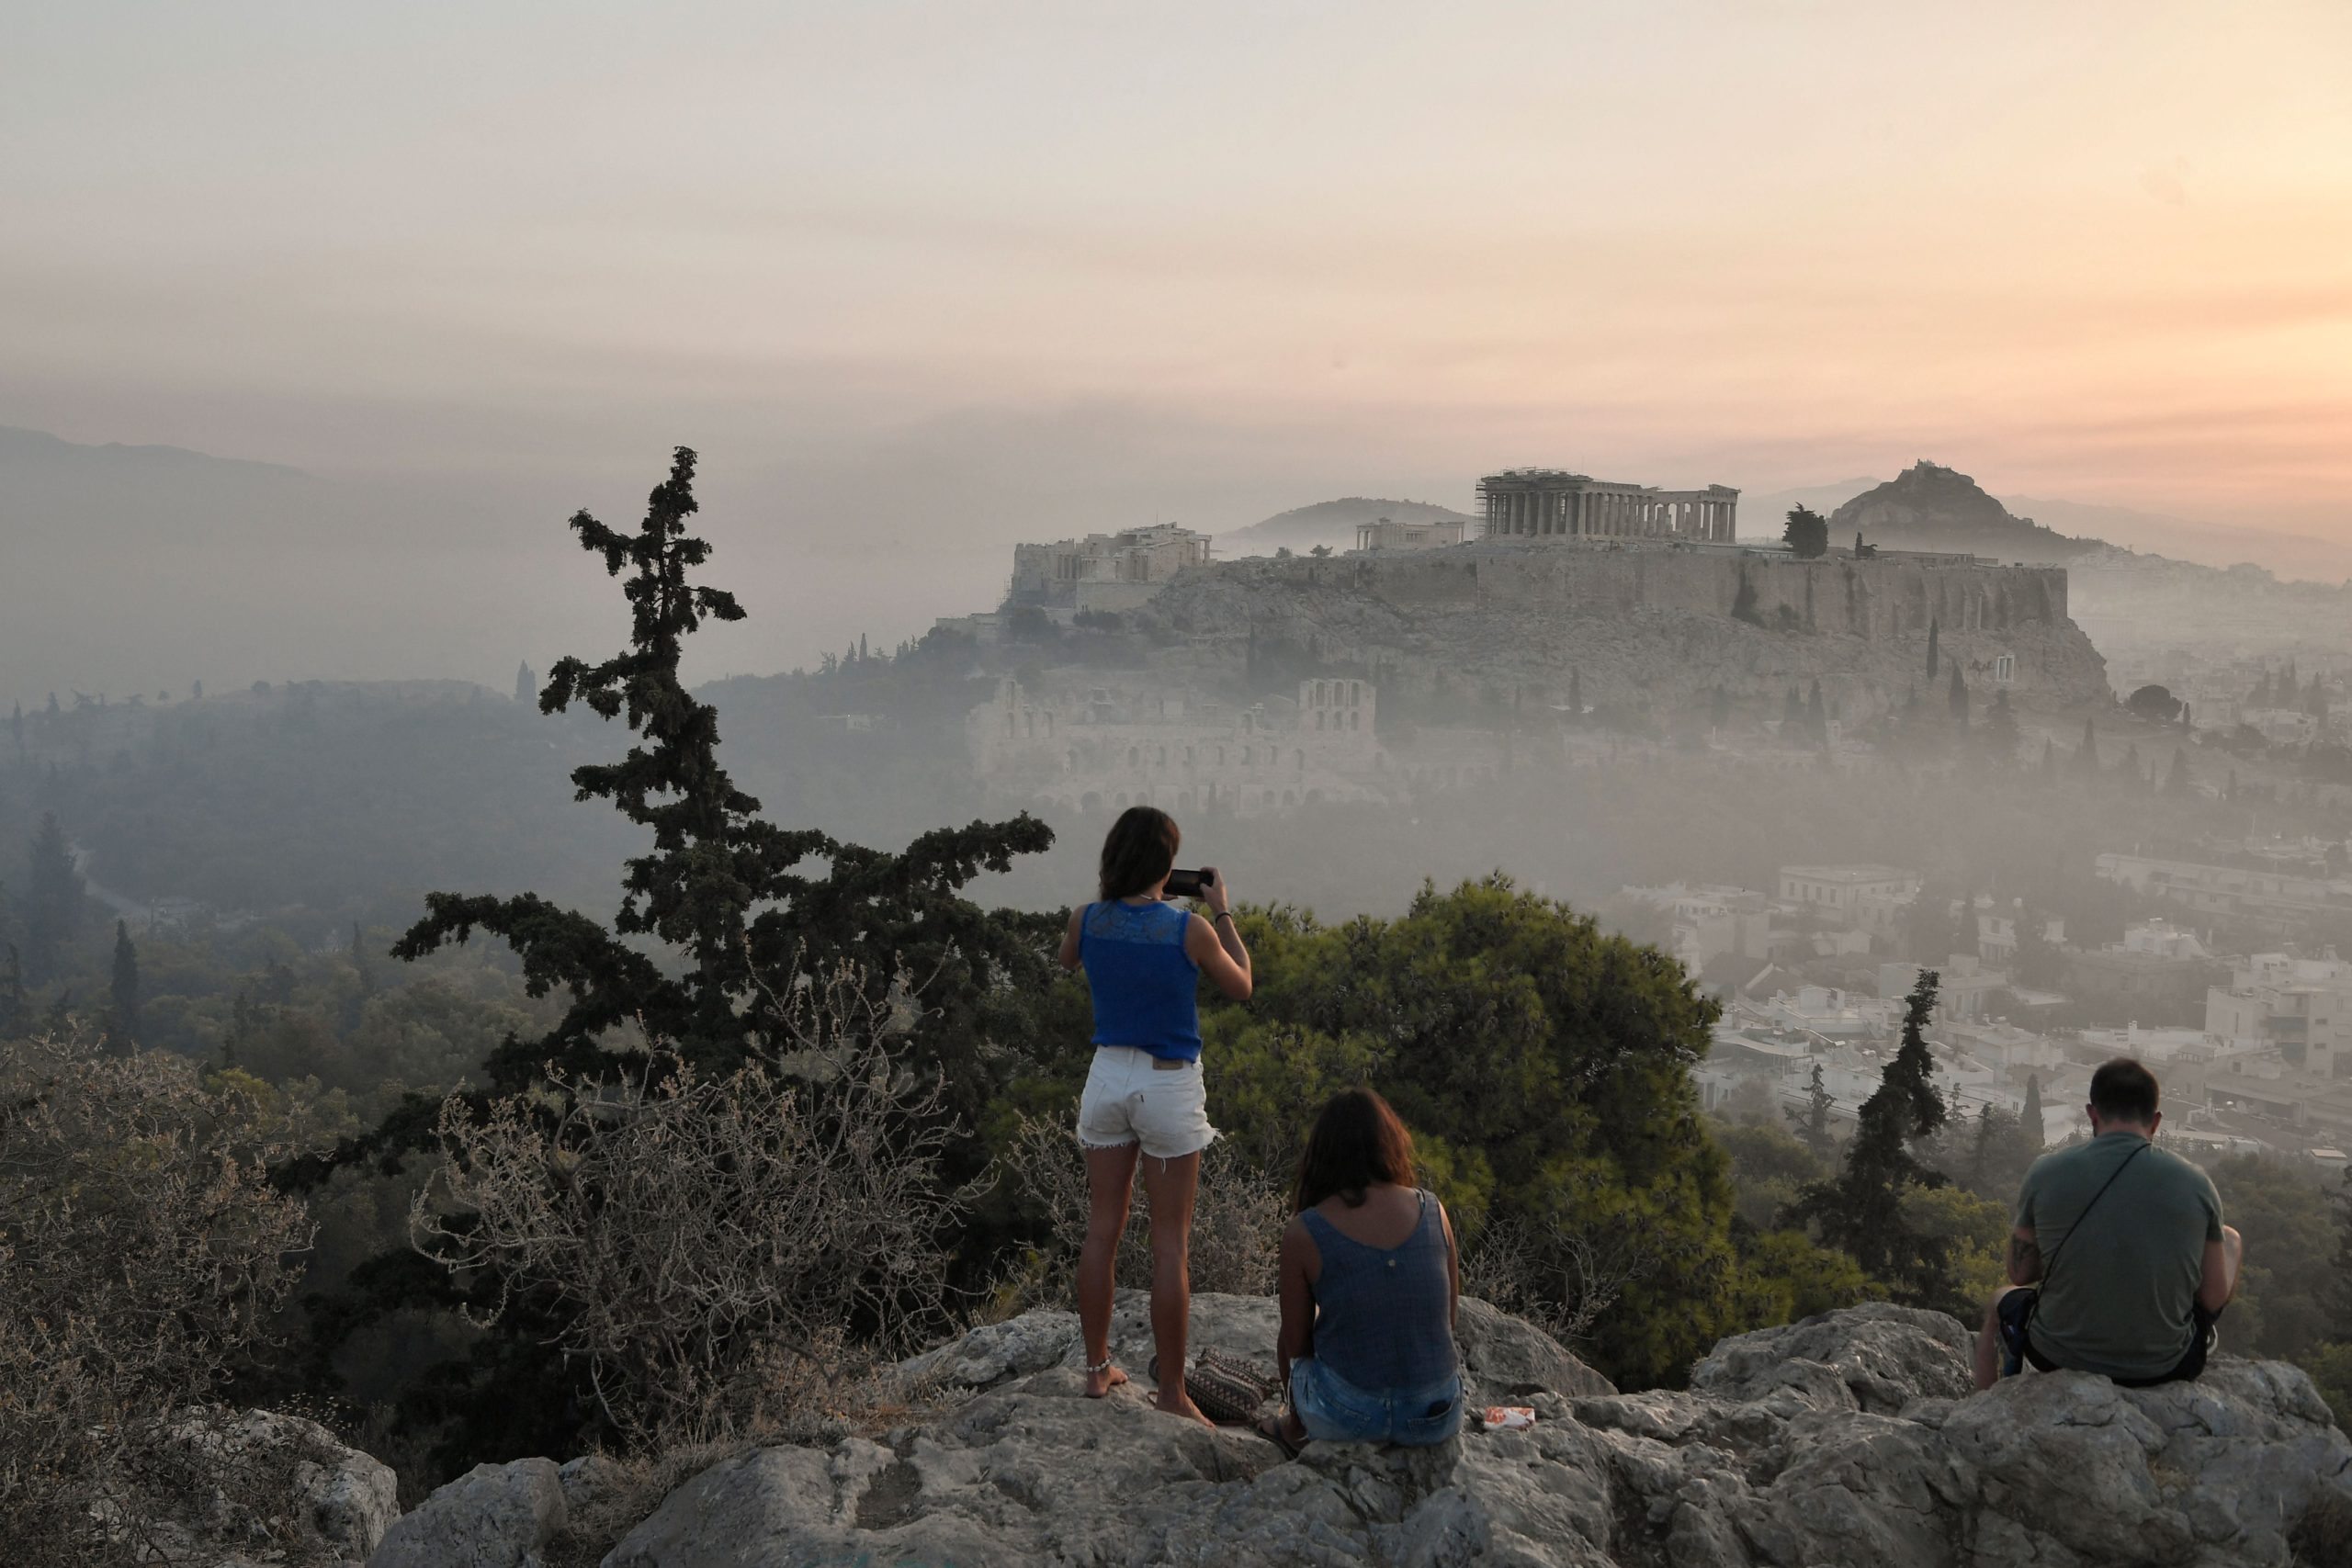 Onlookers take pictures of smoke covering Athens, with the Acropolis in the background. (Photo: Louisa Gouliamaki / AFP, Getty Images)